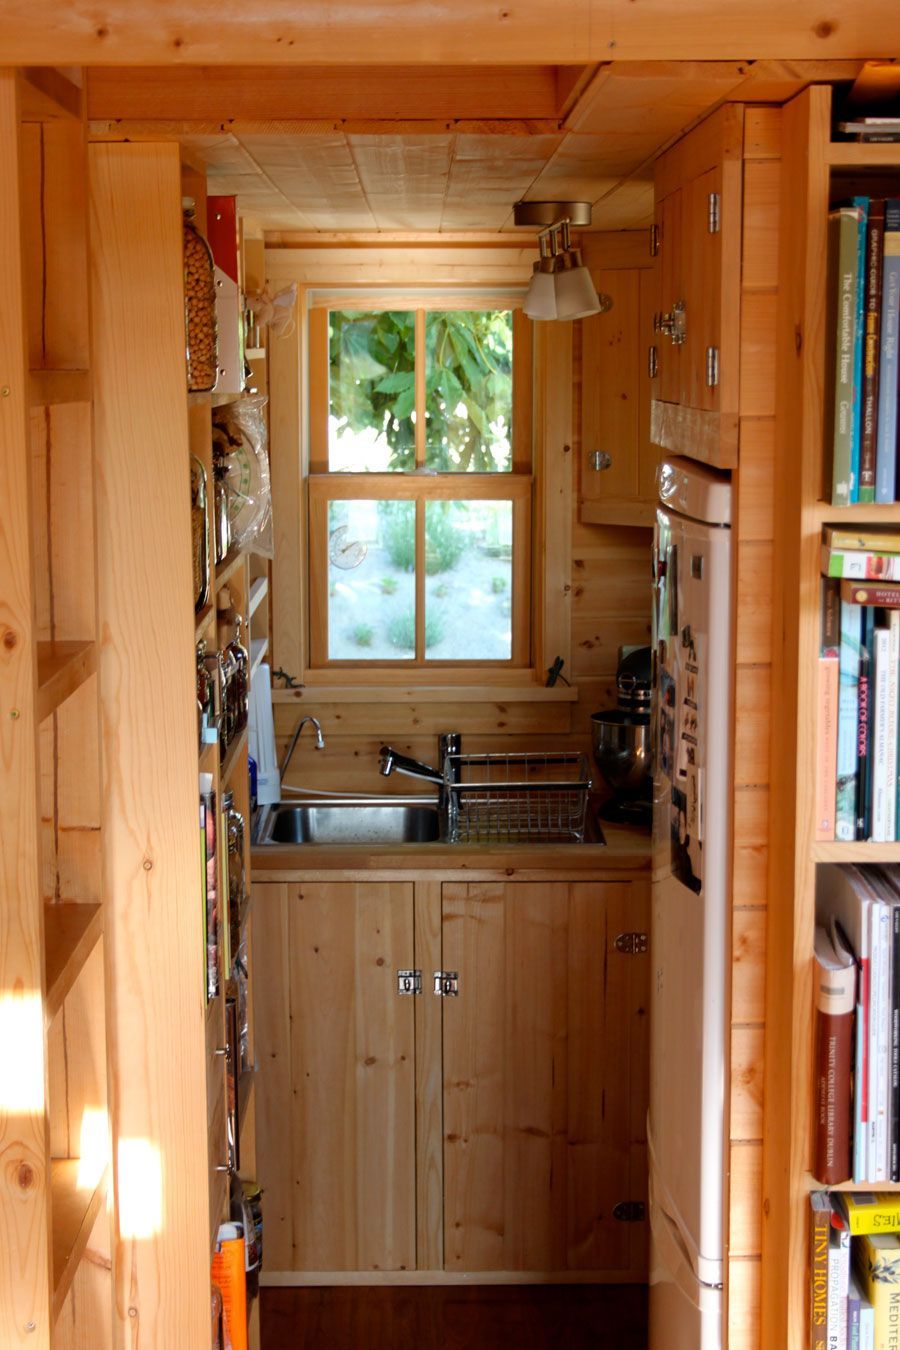 Its an 820 tiny house on wheels and weve lived in it for almost two years. Our c